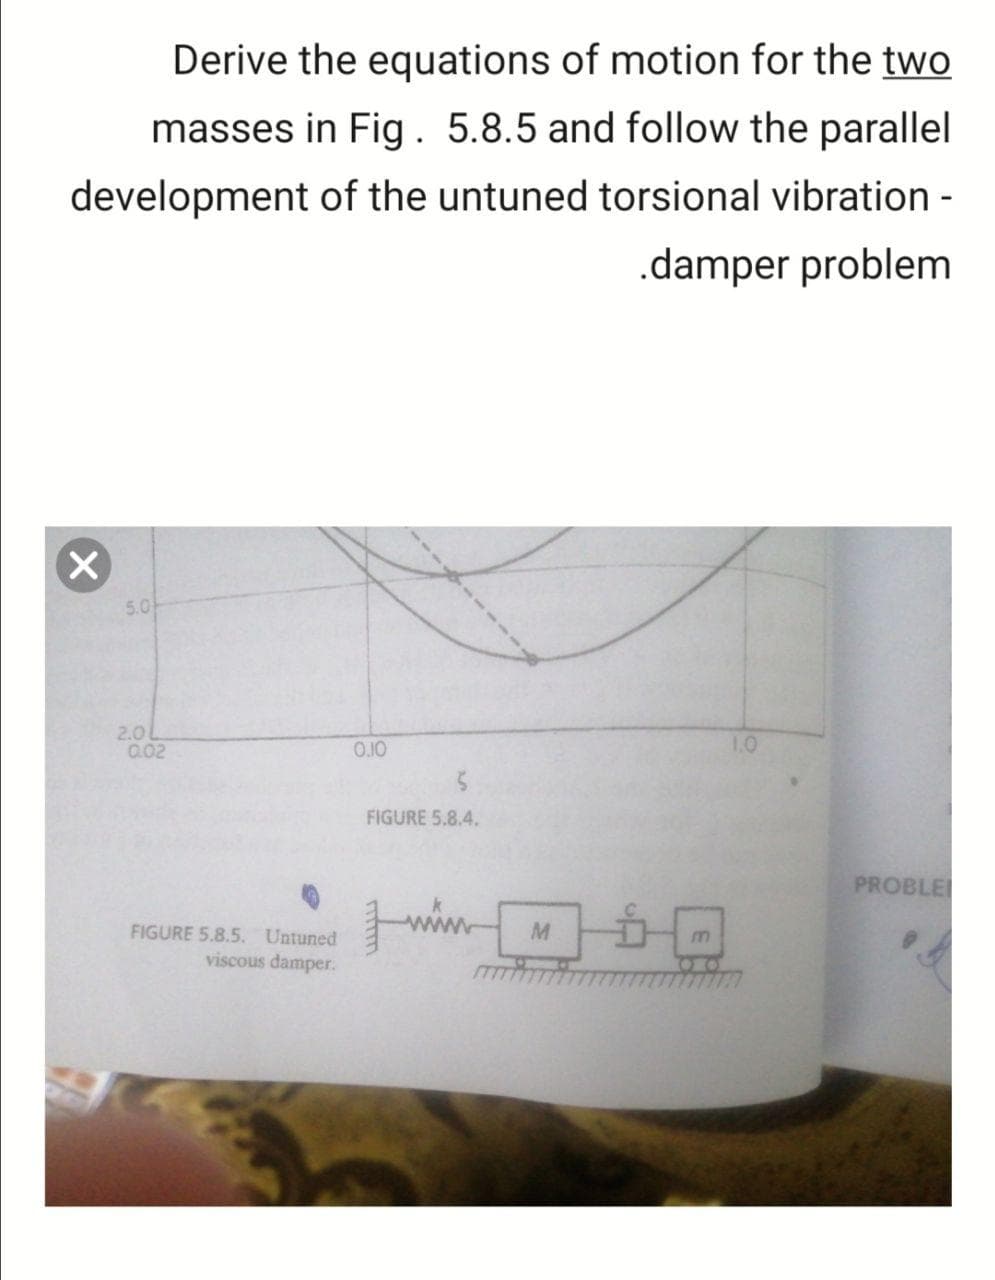 Derive the equations of motion for the two
masses in Fig . 5.8.5 and follow the parallel
development of the untuned torsional vibration -
.damper problem
5.0
2.0L
0.02
1.0
O.10
FIGURE 5.8.4.
PROBLE
FIGURE 5.8.5. Untuned
M
viscous damper.
